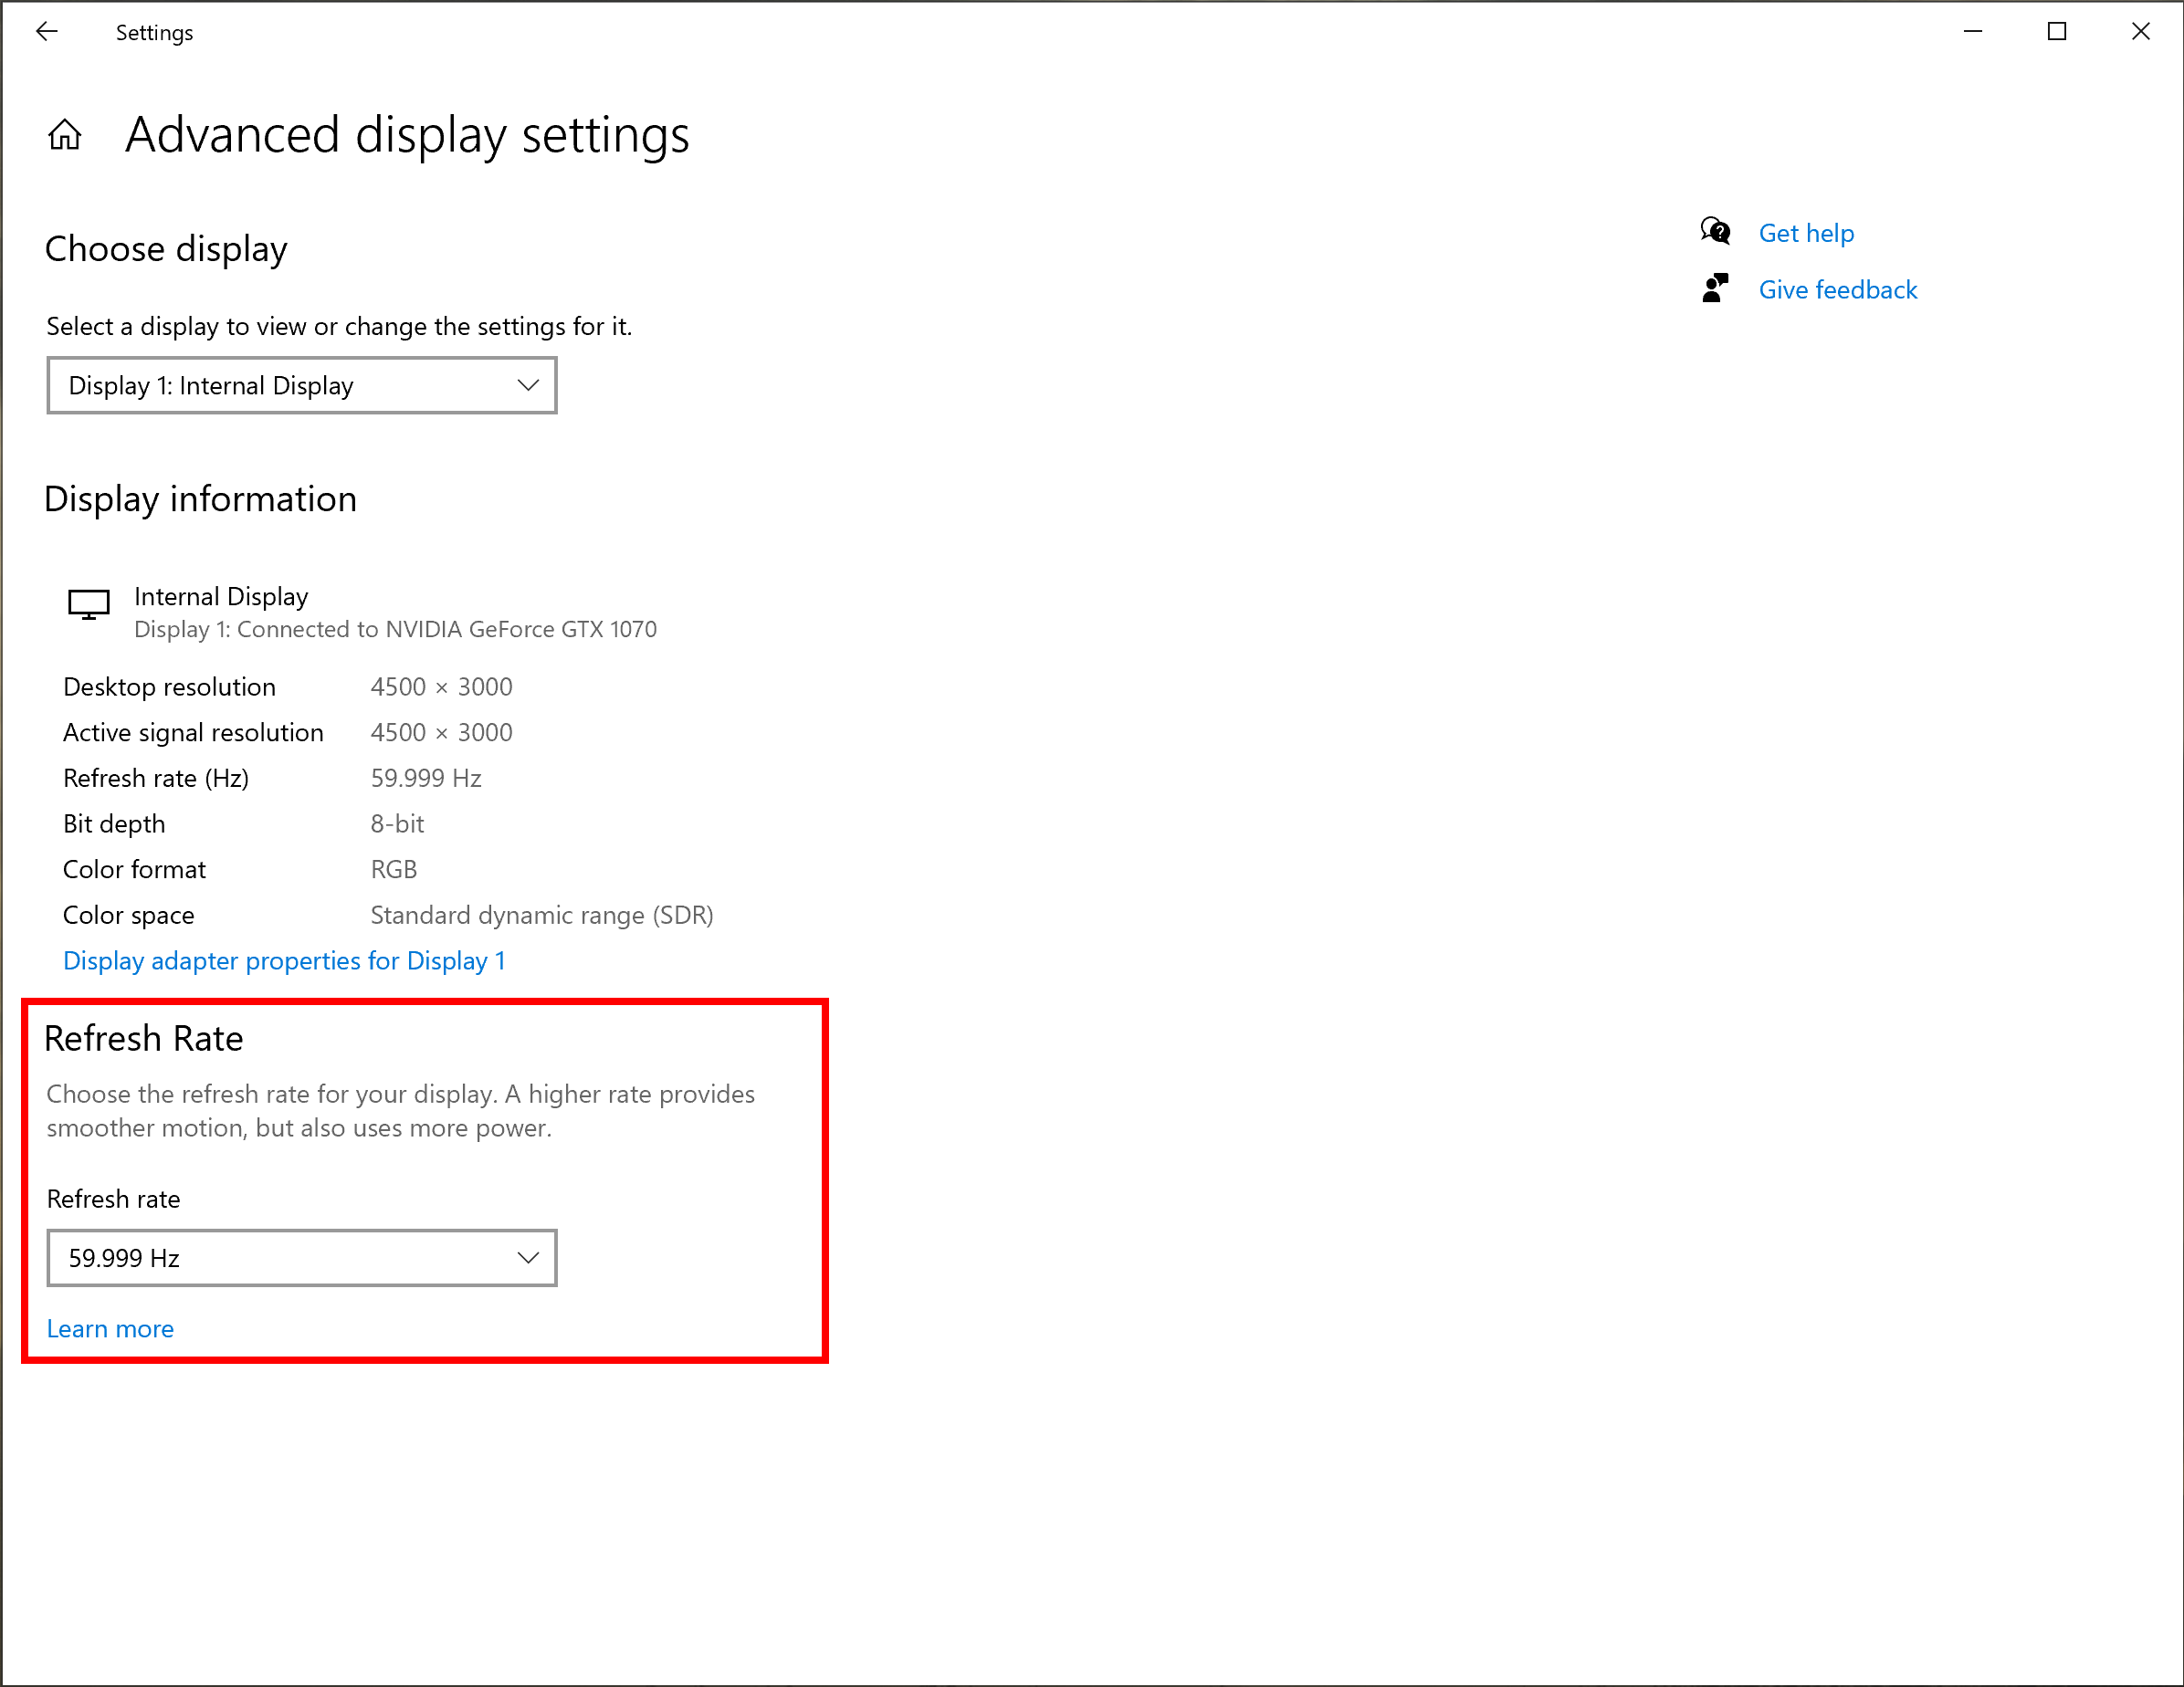 You can now go to Settings > System > Display and Advance display settings change the refresh rate of your display.